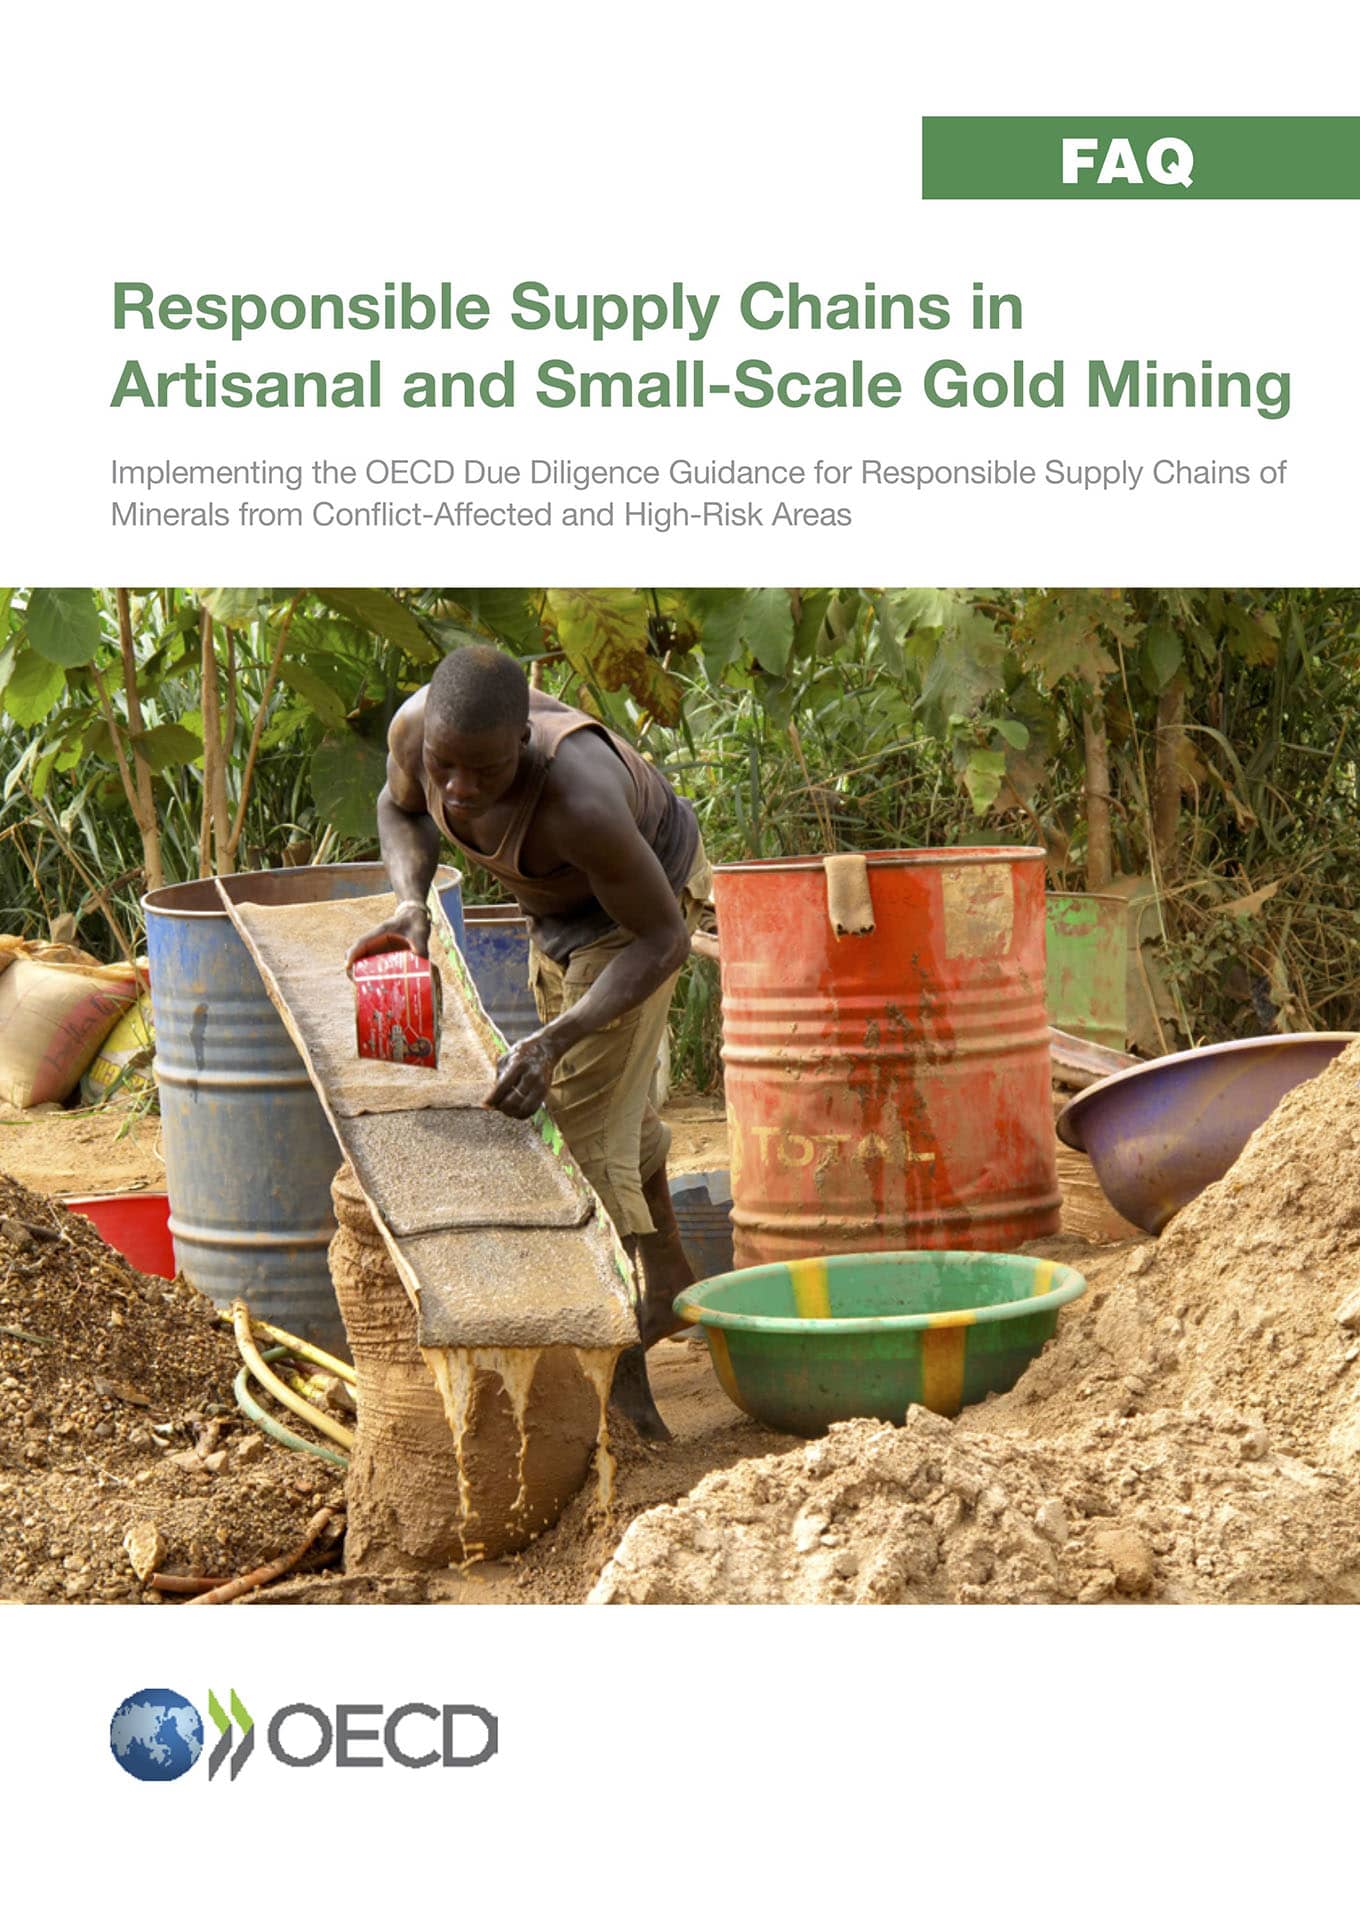 Responsible Supply Chains in Artisanal and Small-Scale Gold Mining (OECD, 2016)